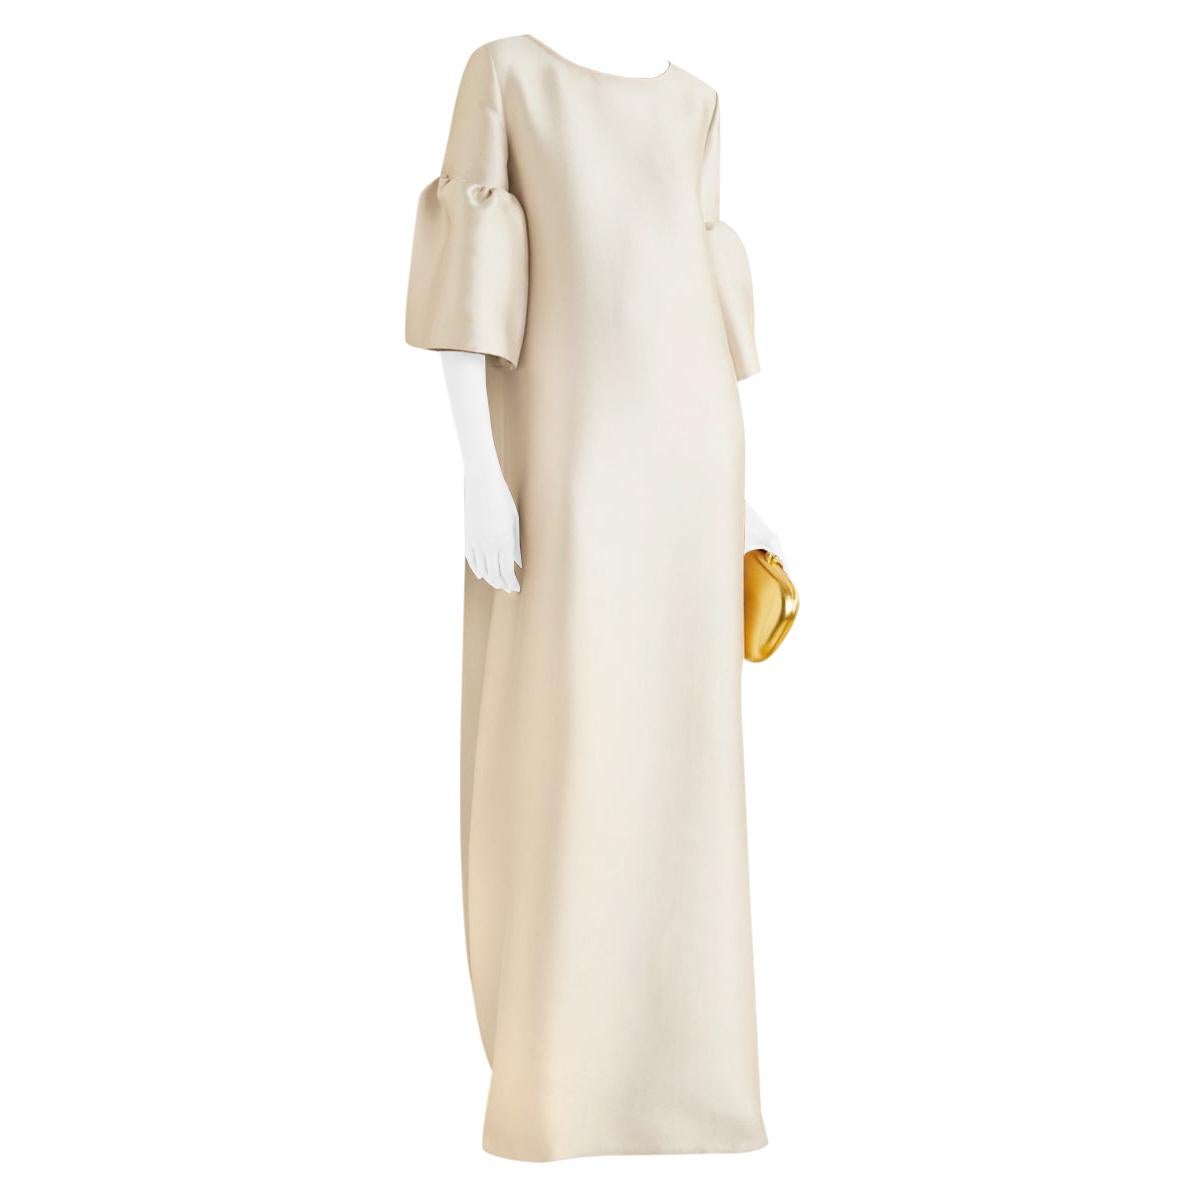 Reem Acra Beige Long Sleeve Midi Dress 

-Made of a lightweight satin pique fabric 
-Classic elegant cut 
-Loose fit 
-Ruffled flared sleeves 
-Gorgeous sand hue 
-Timeless neutral design 

Materials:
100% polyester 

Dry clean only 

PLEASE NOTE -